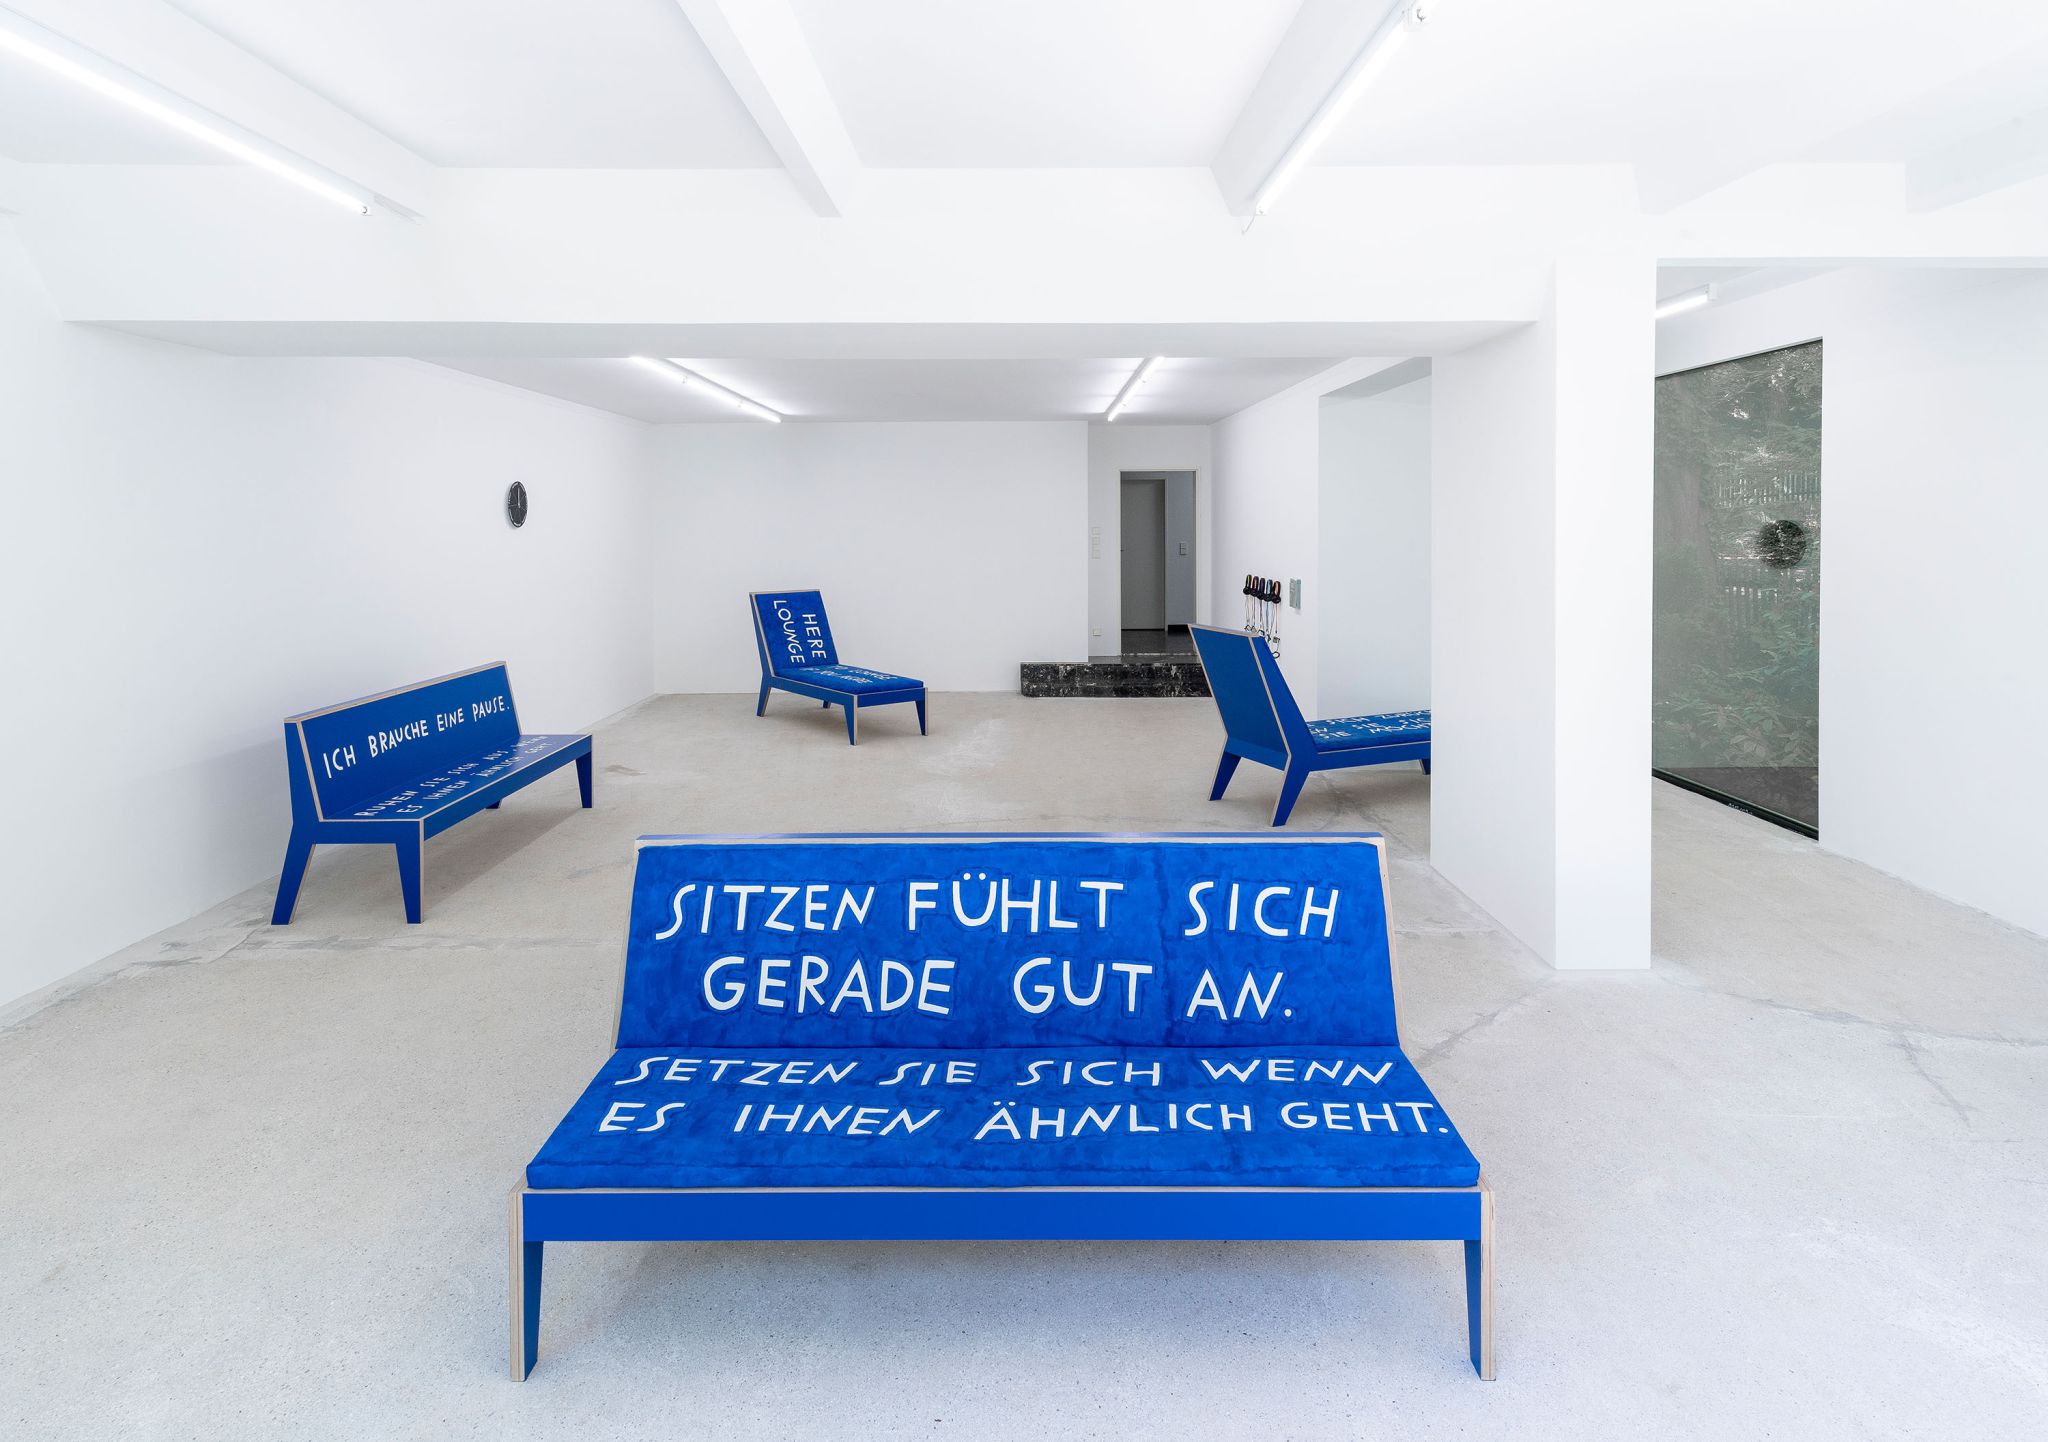 Finnegan Shannon, <em>Slower,</em> Installation view, Deborah Schamoni, 2022, Image description: Two blue benches and two chaise lounges in an exhibition room, all have text written in white letters on them. They are all facing different directions, scattered around the room. In the background, there’s a black clock and on the opposite side of the room, there are five headphones hanging on a wall.